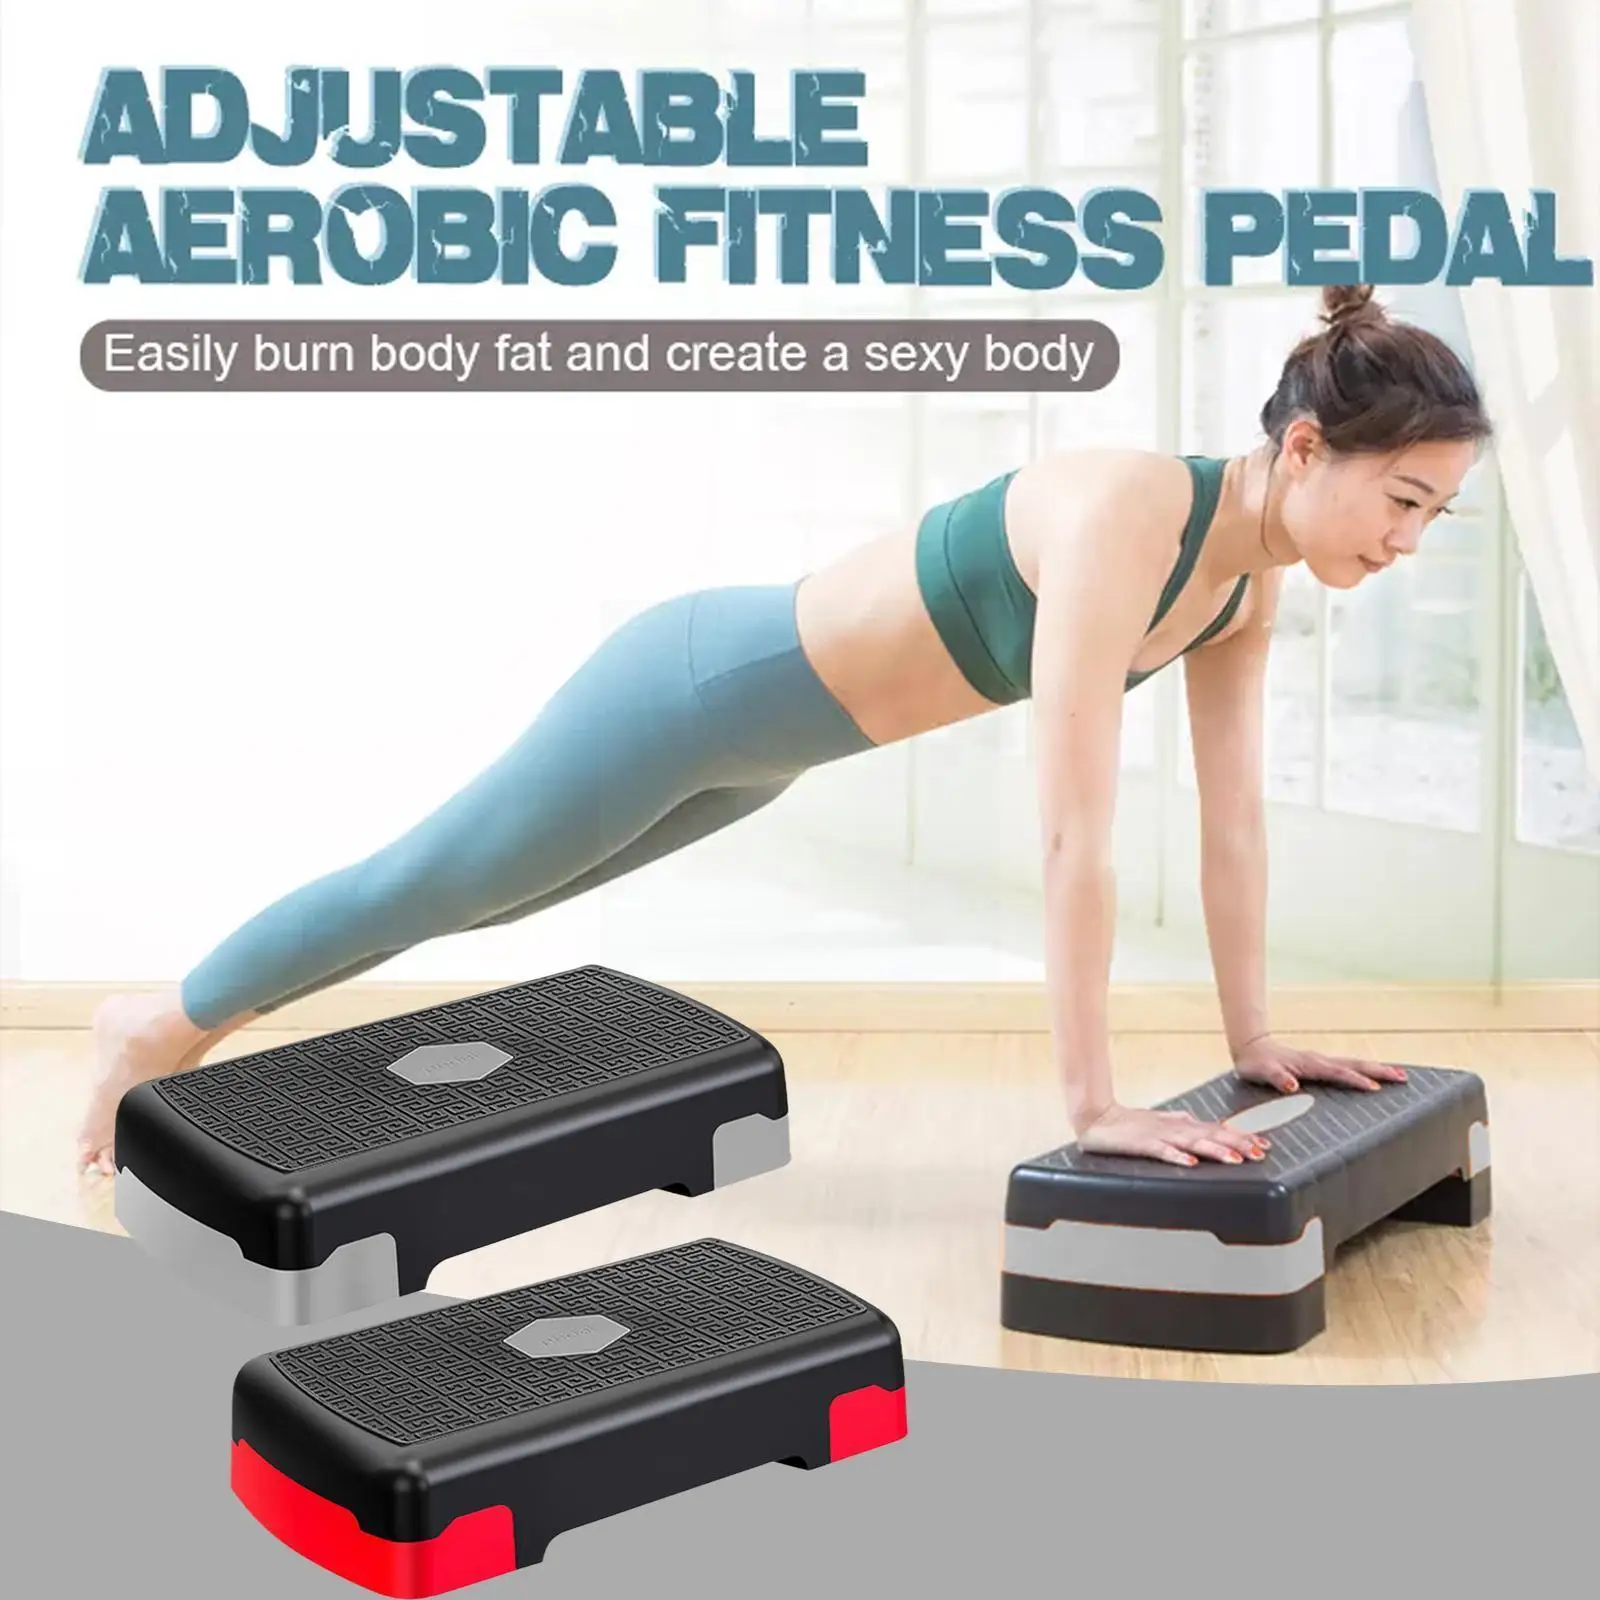 45cm Fitness Pedals Aerobic Step Platform Exercise Board Adjustable Home Yoga Pedal Exercise Fitness Equipment For Home Workout